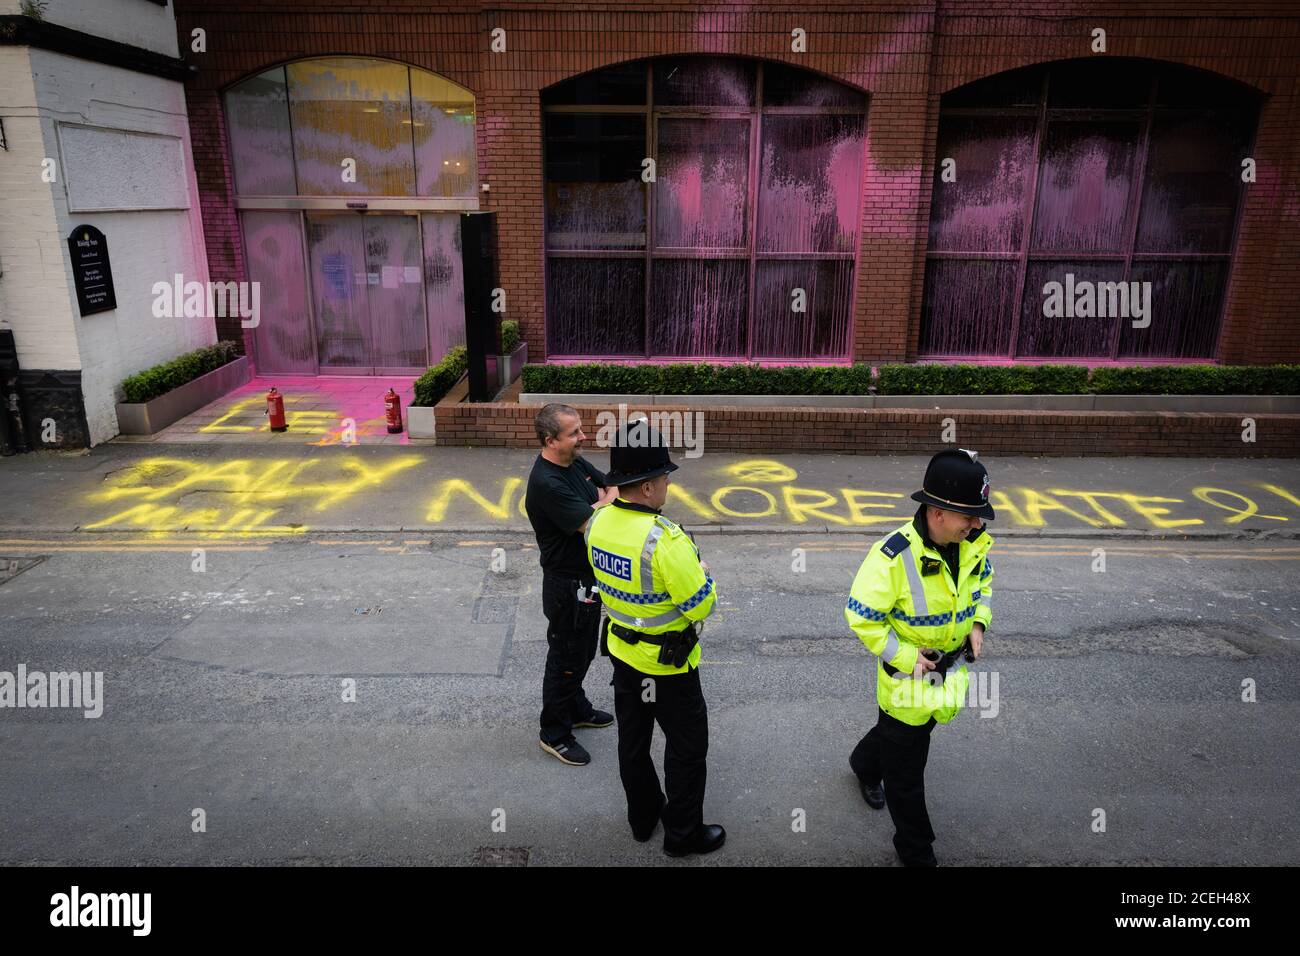 Manchester, UK. 01st Sep, 2020. Police officers attend the Daily Mail regional office which has been sprayed with pink paint. The act was due articles associated around the migrant crisis on British shores.The Northern Rebellion, which is part of the Extinction Rebellion movement, take to the Streets for two weeks of action under the banner of ÔWe Want To LiveÕ.Andy Barton/Alamy Live News Credit: Andy Barton/Alamy Live News Stock Photo